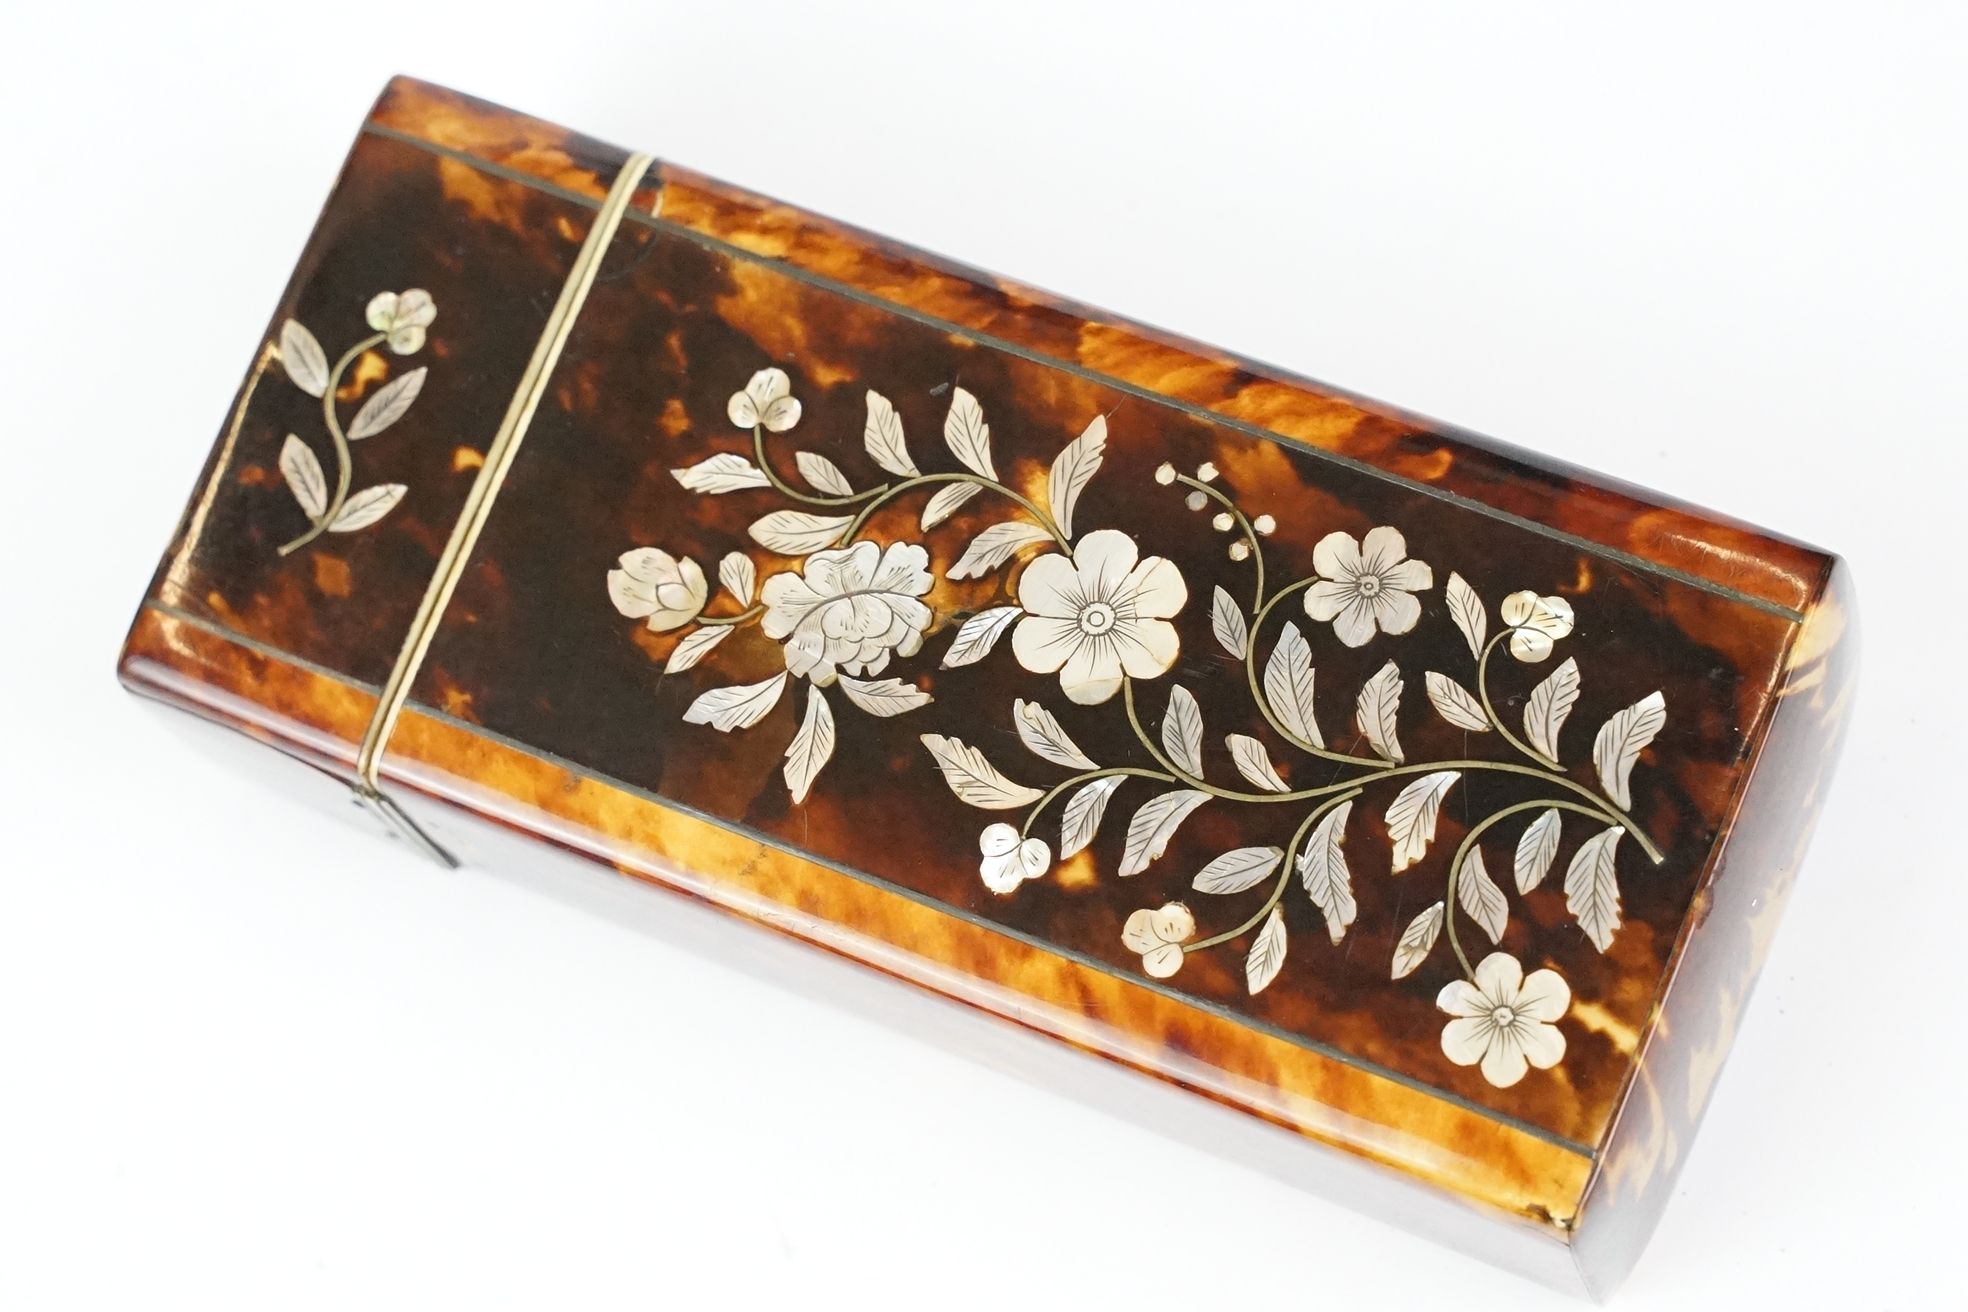 An early 20th century tortoiseshell spectacle case with mother of pearl floral decoration. - Image 2 of 6